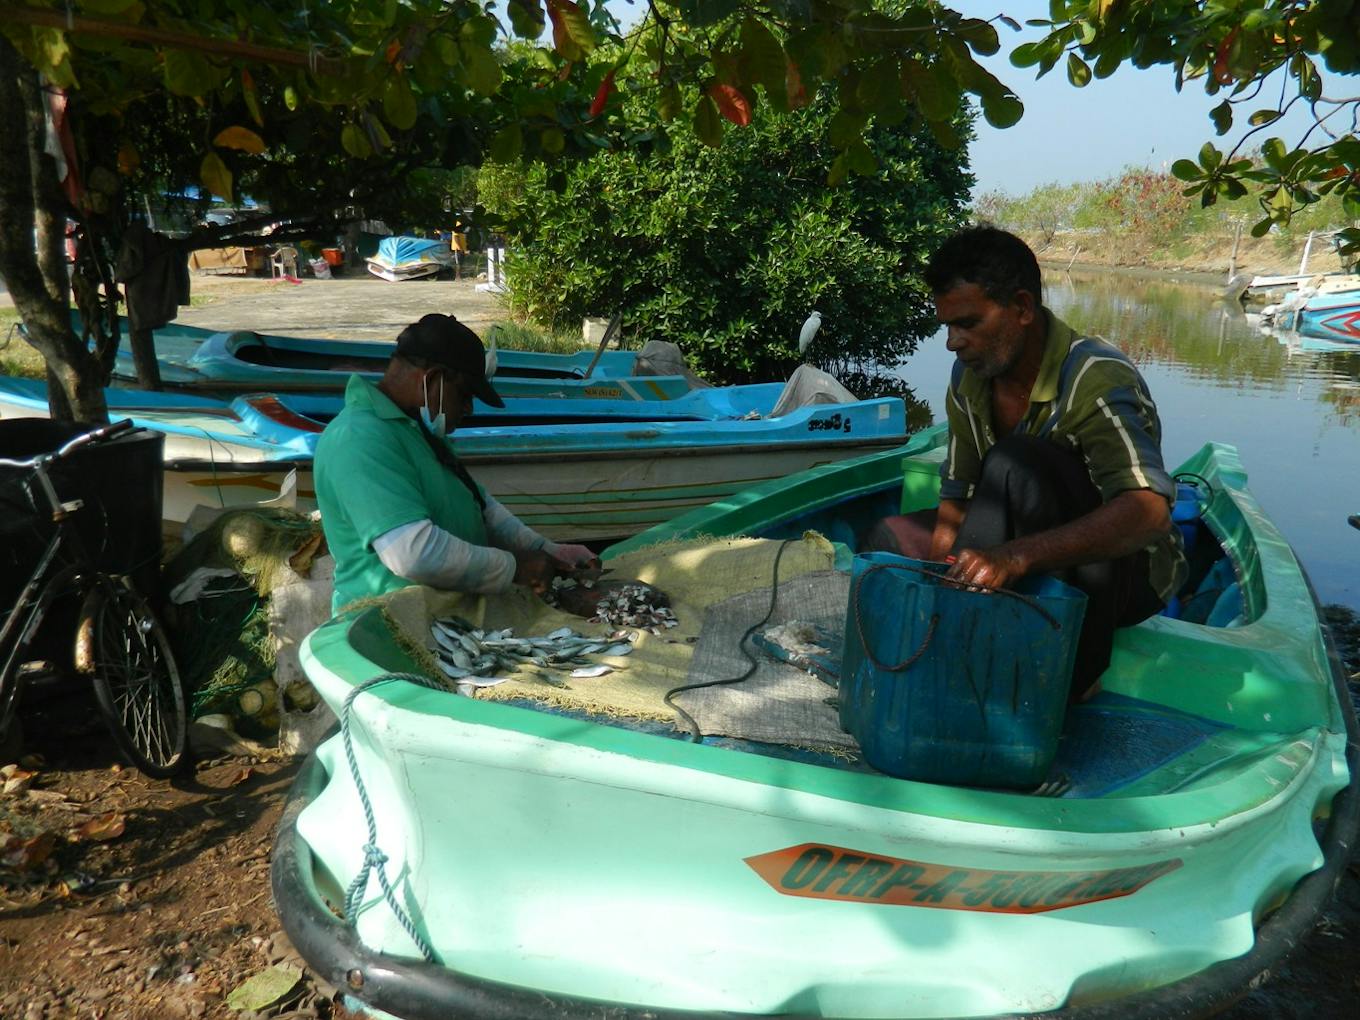 Fishermen are unhappy about the compensation from the spill. Image: Sandun Jayawardana